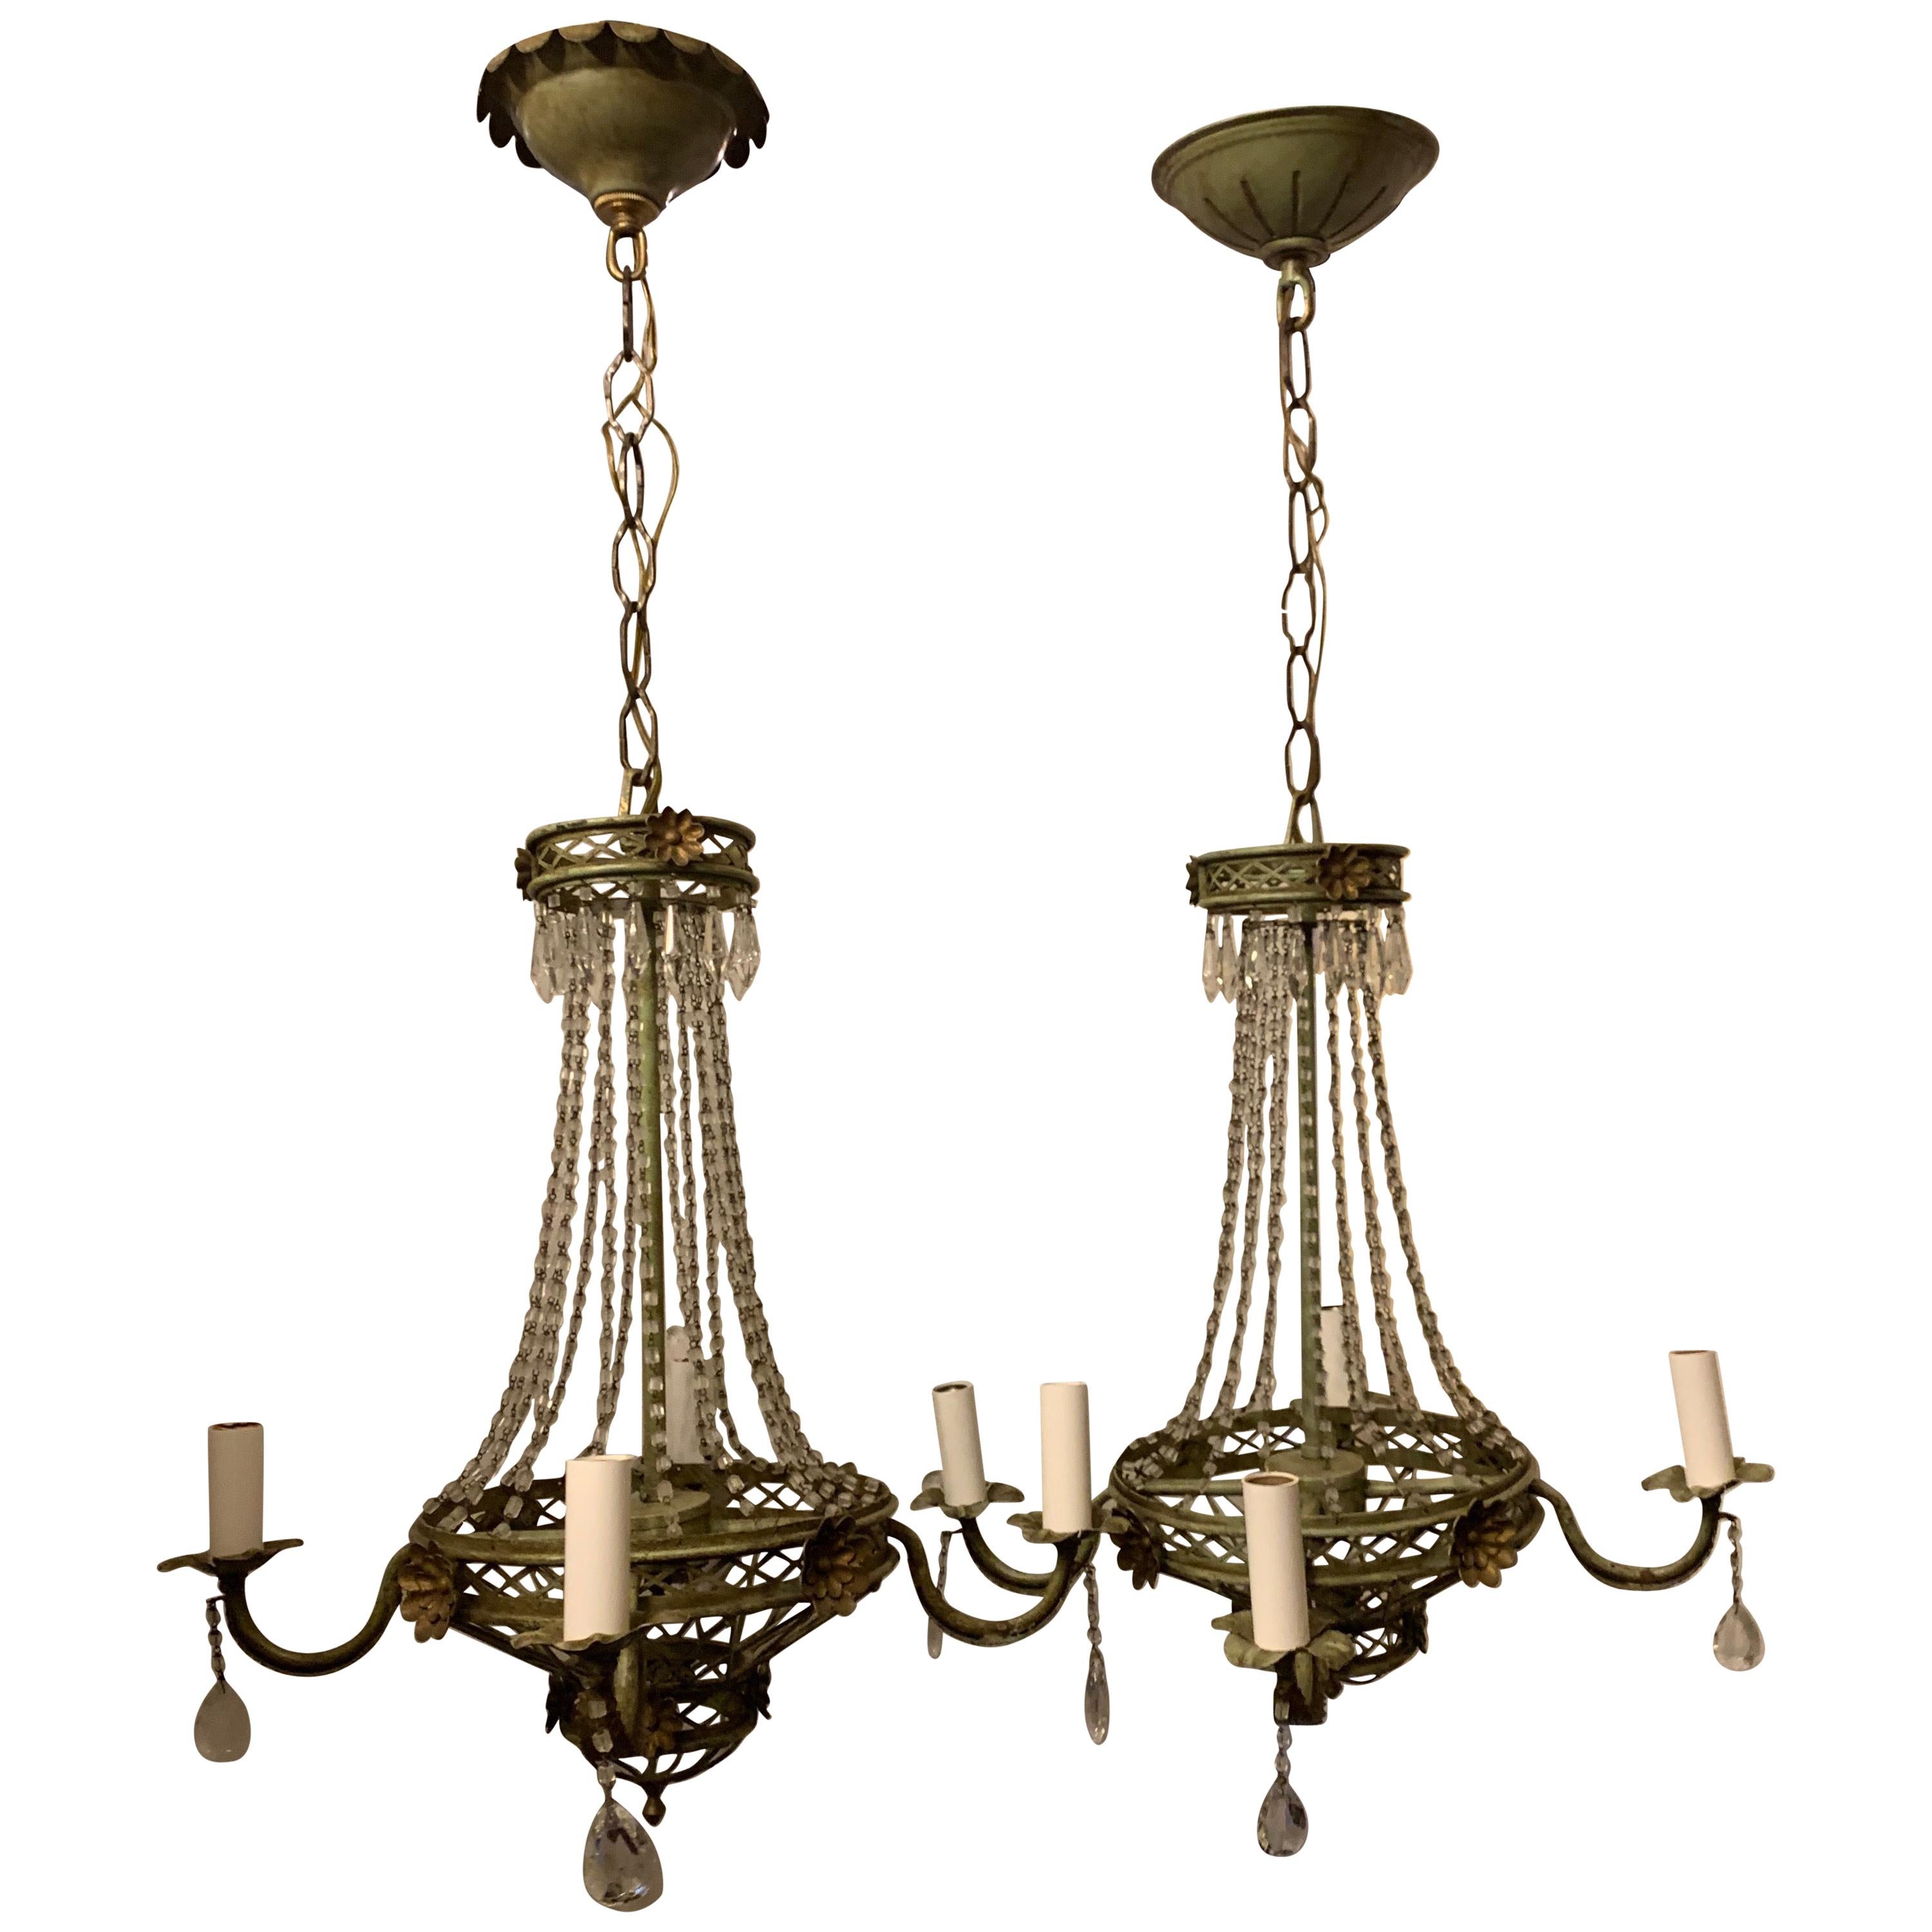 Wonderful Tole Gilt Green Patinated Vintage Beaded Basket Chandeliers Fixtures For Sale